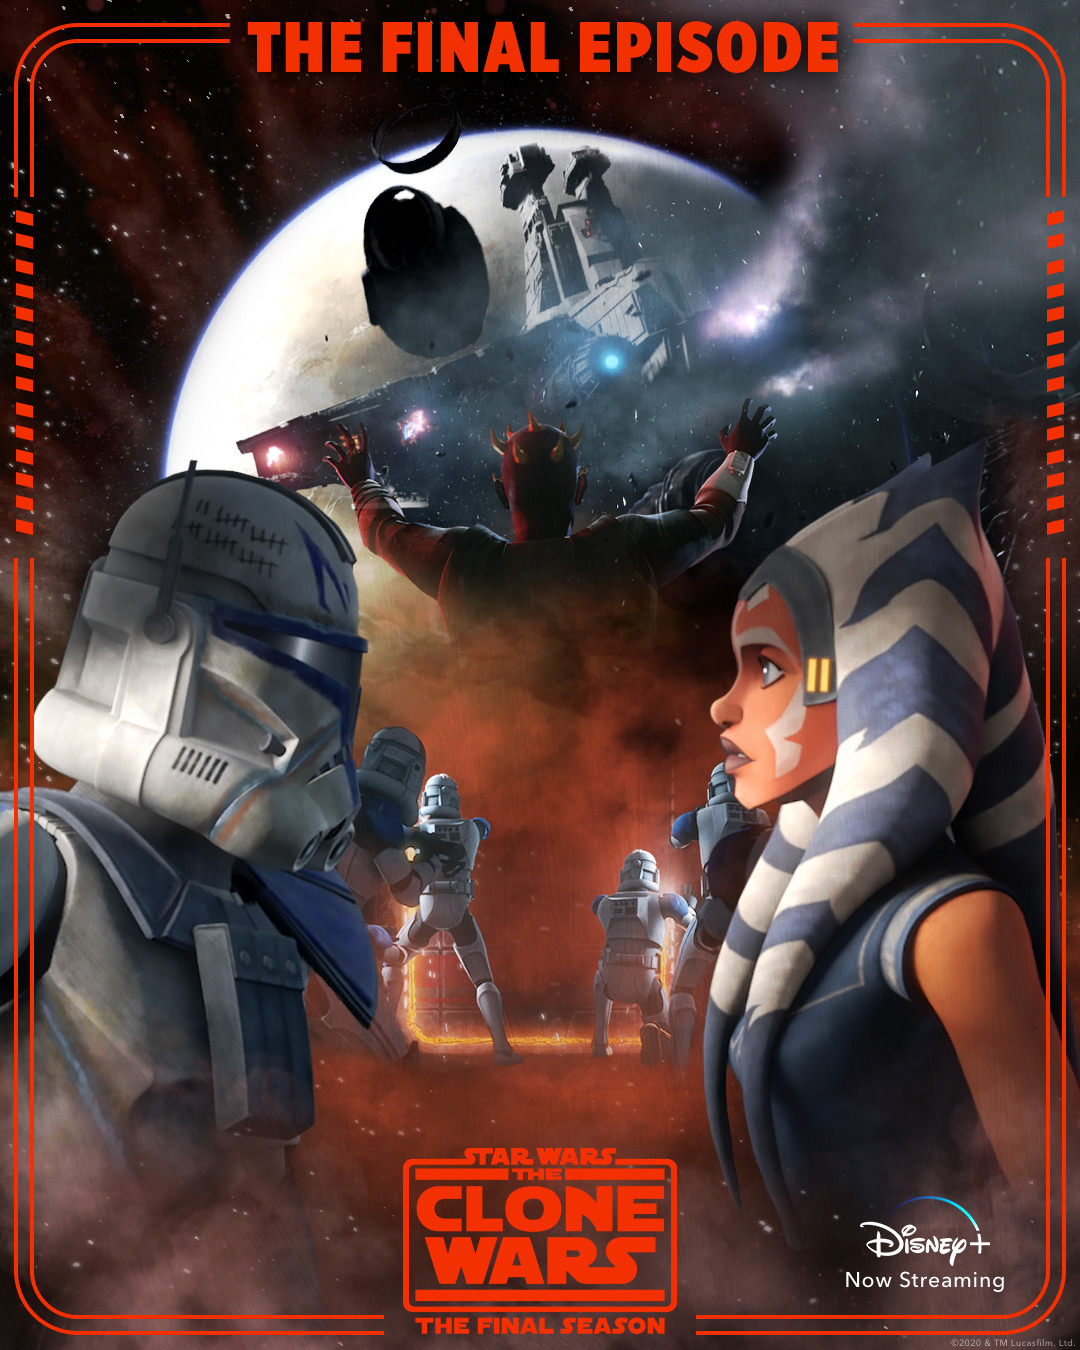 Extra Large TV Poster Image for Star Wars: The Clone Wars (#4 of 6)